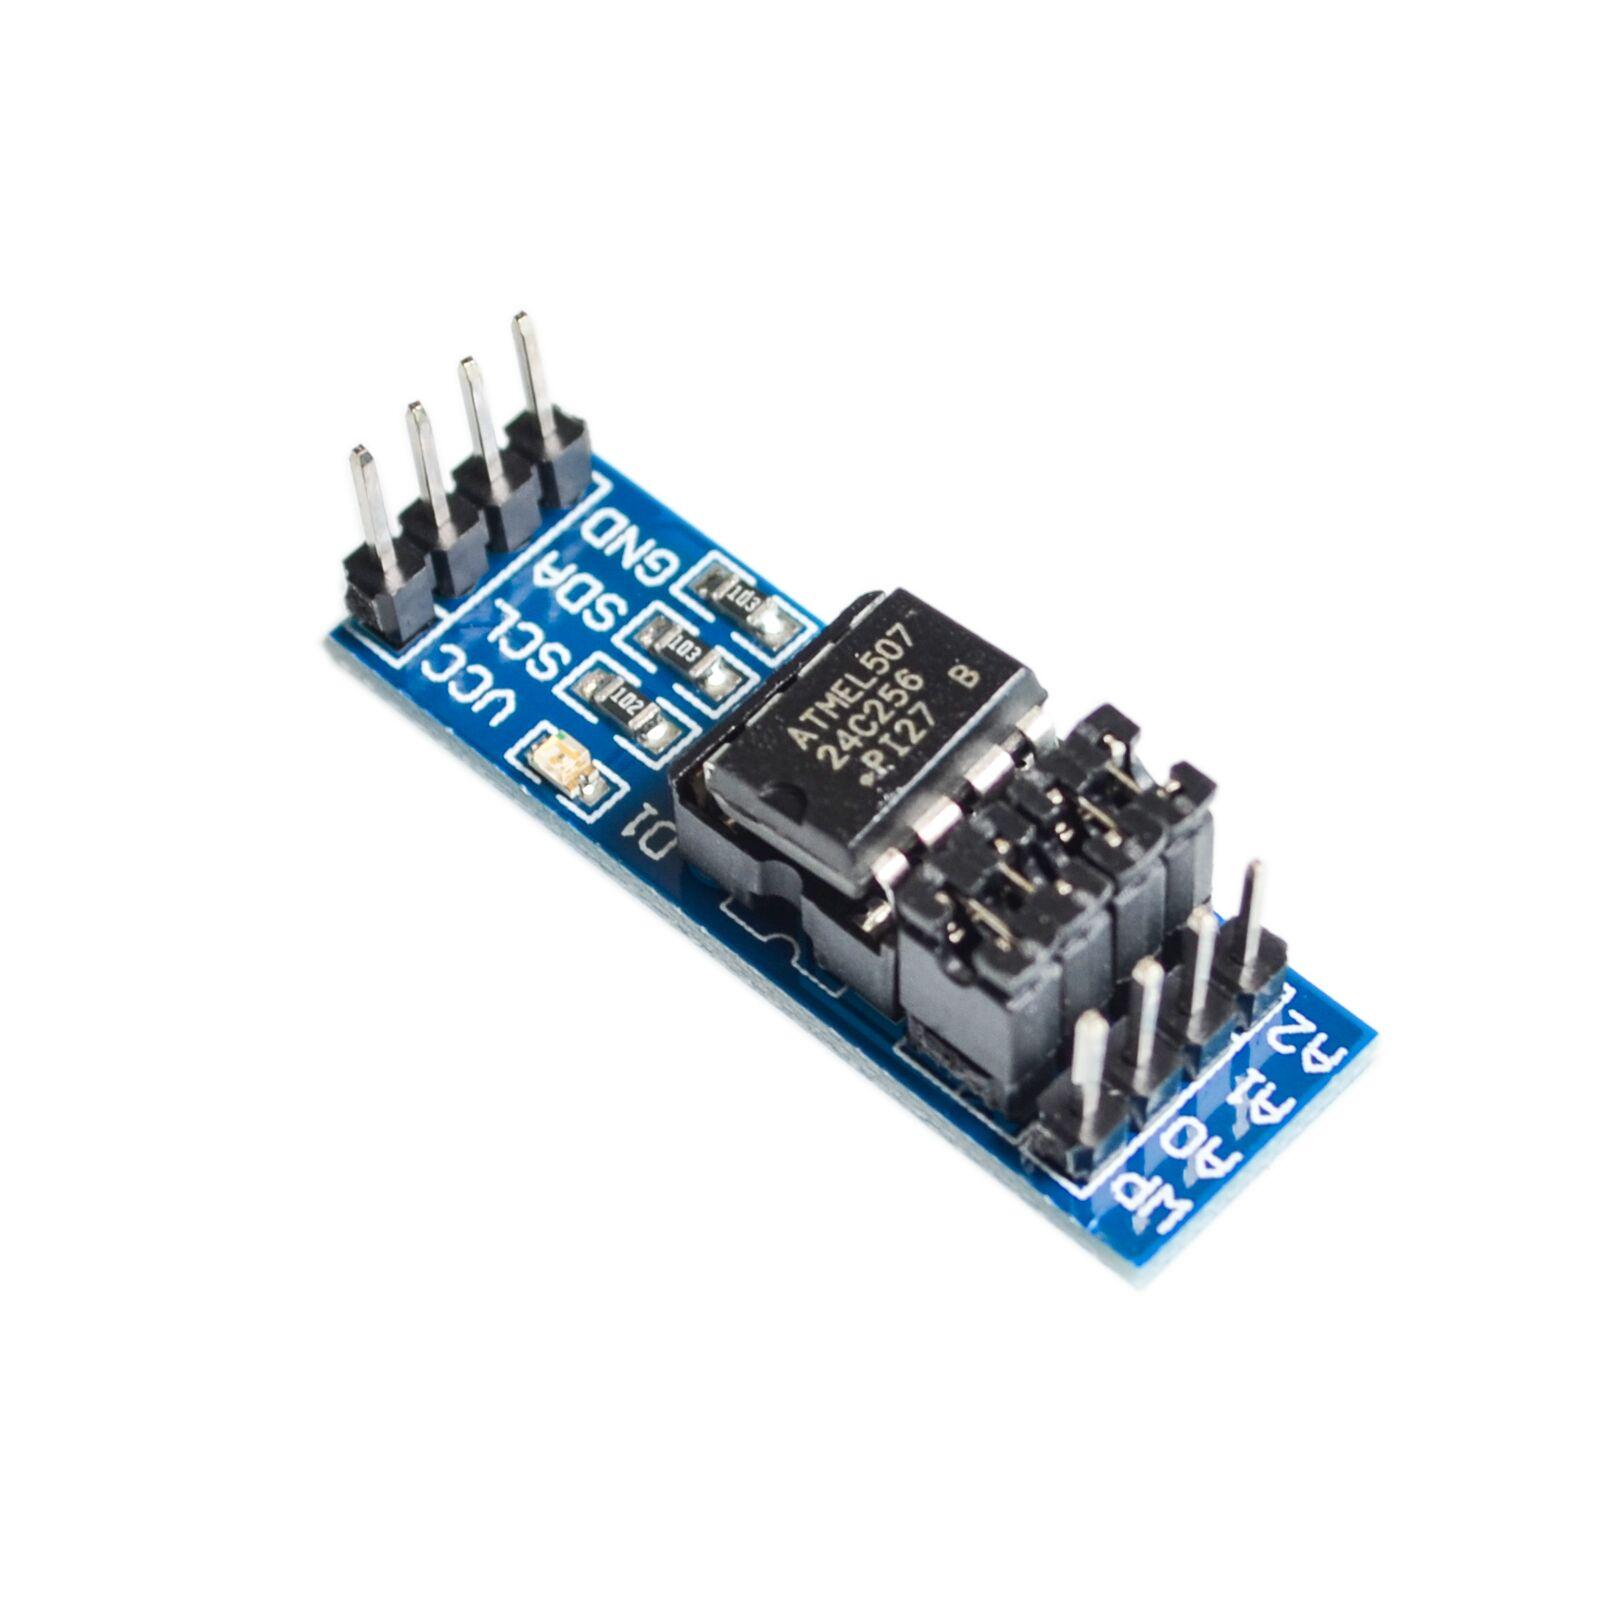 AT24C256-Memory-Module-I2C-Interface-EEPROM-in-stock